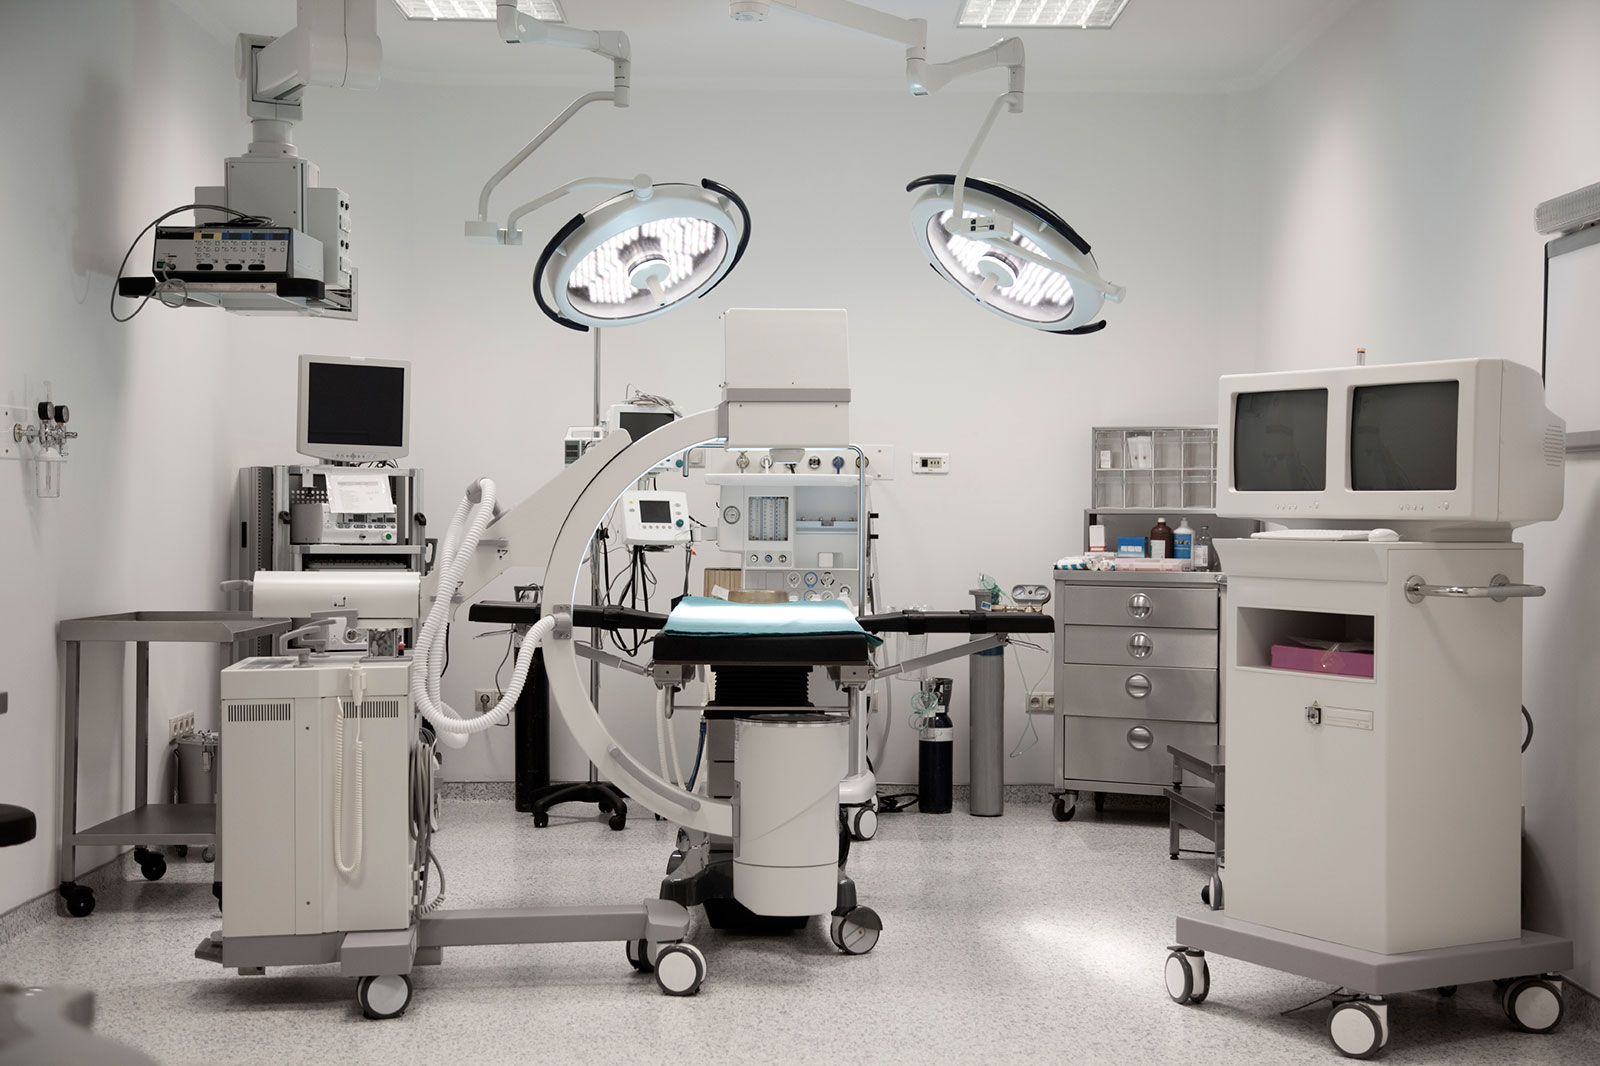 HOW IS CLASSIFICATION OF MEDICAL EQUIPMENT?